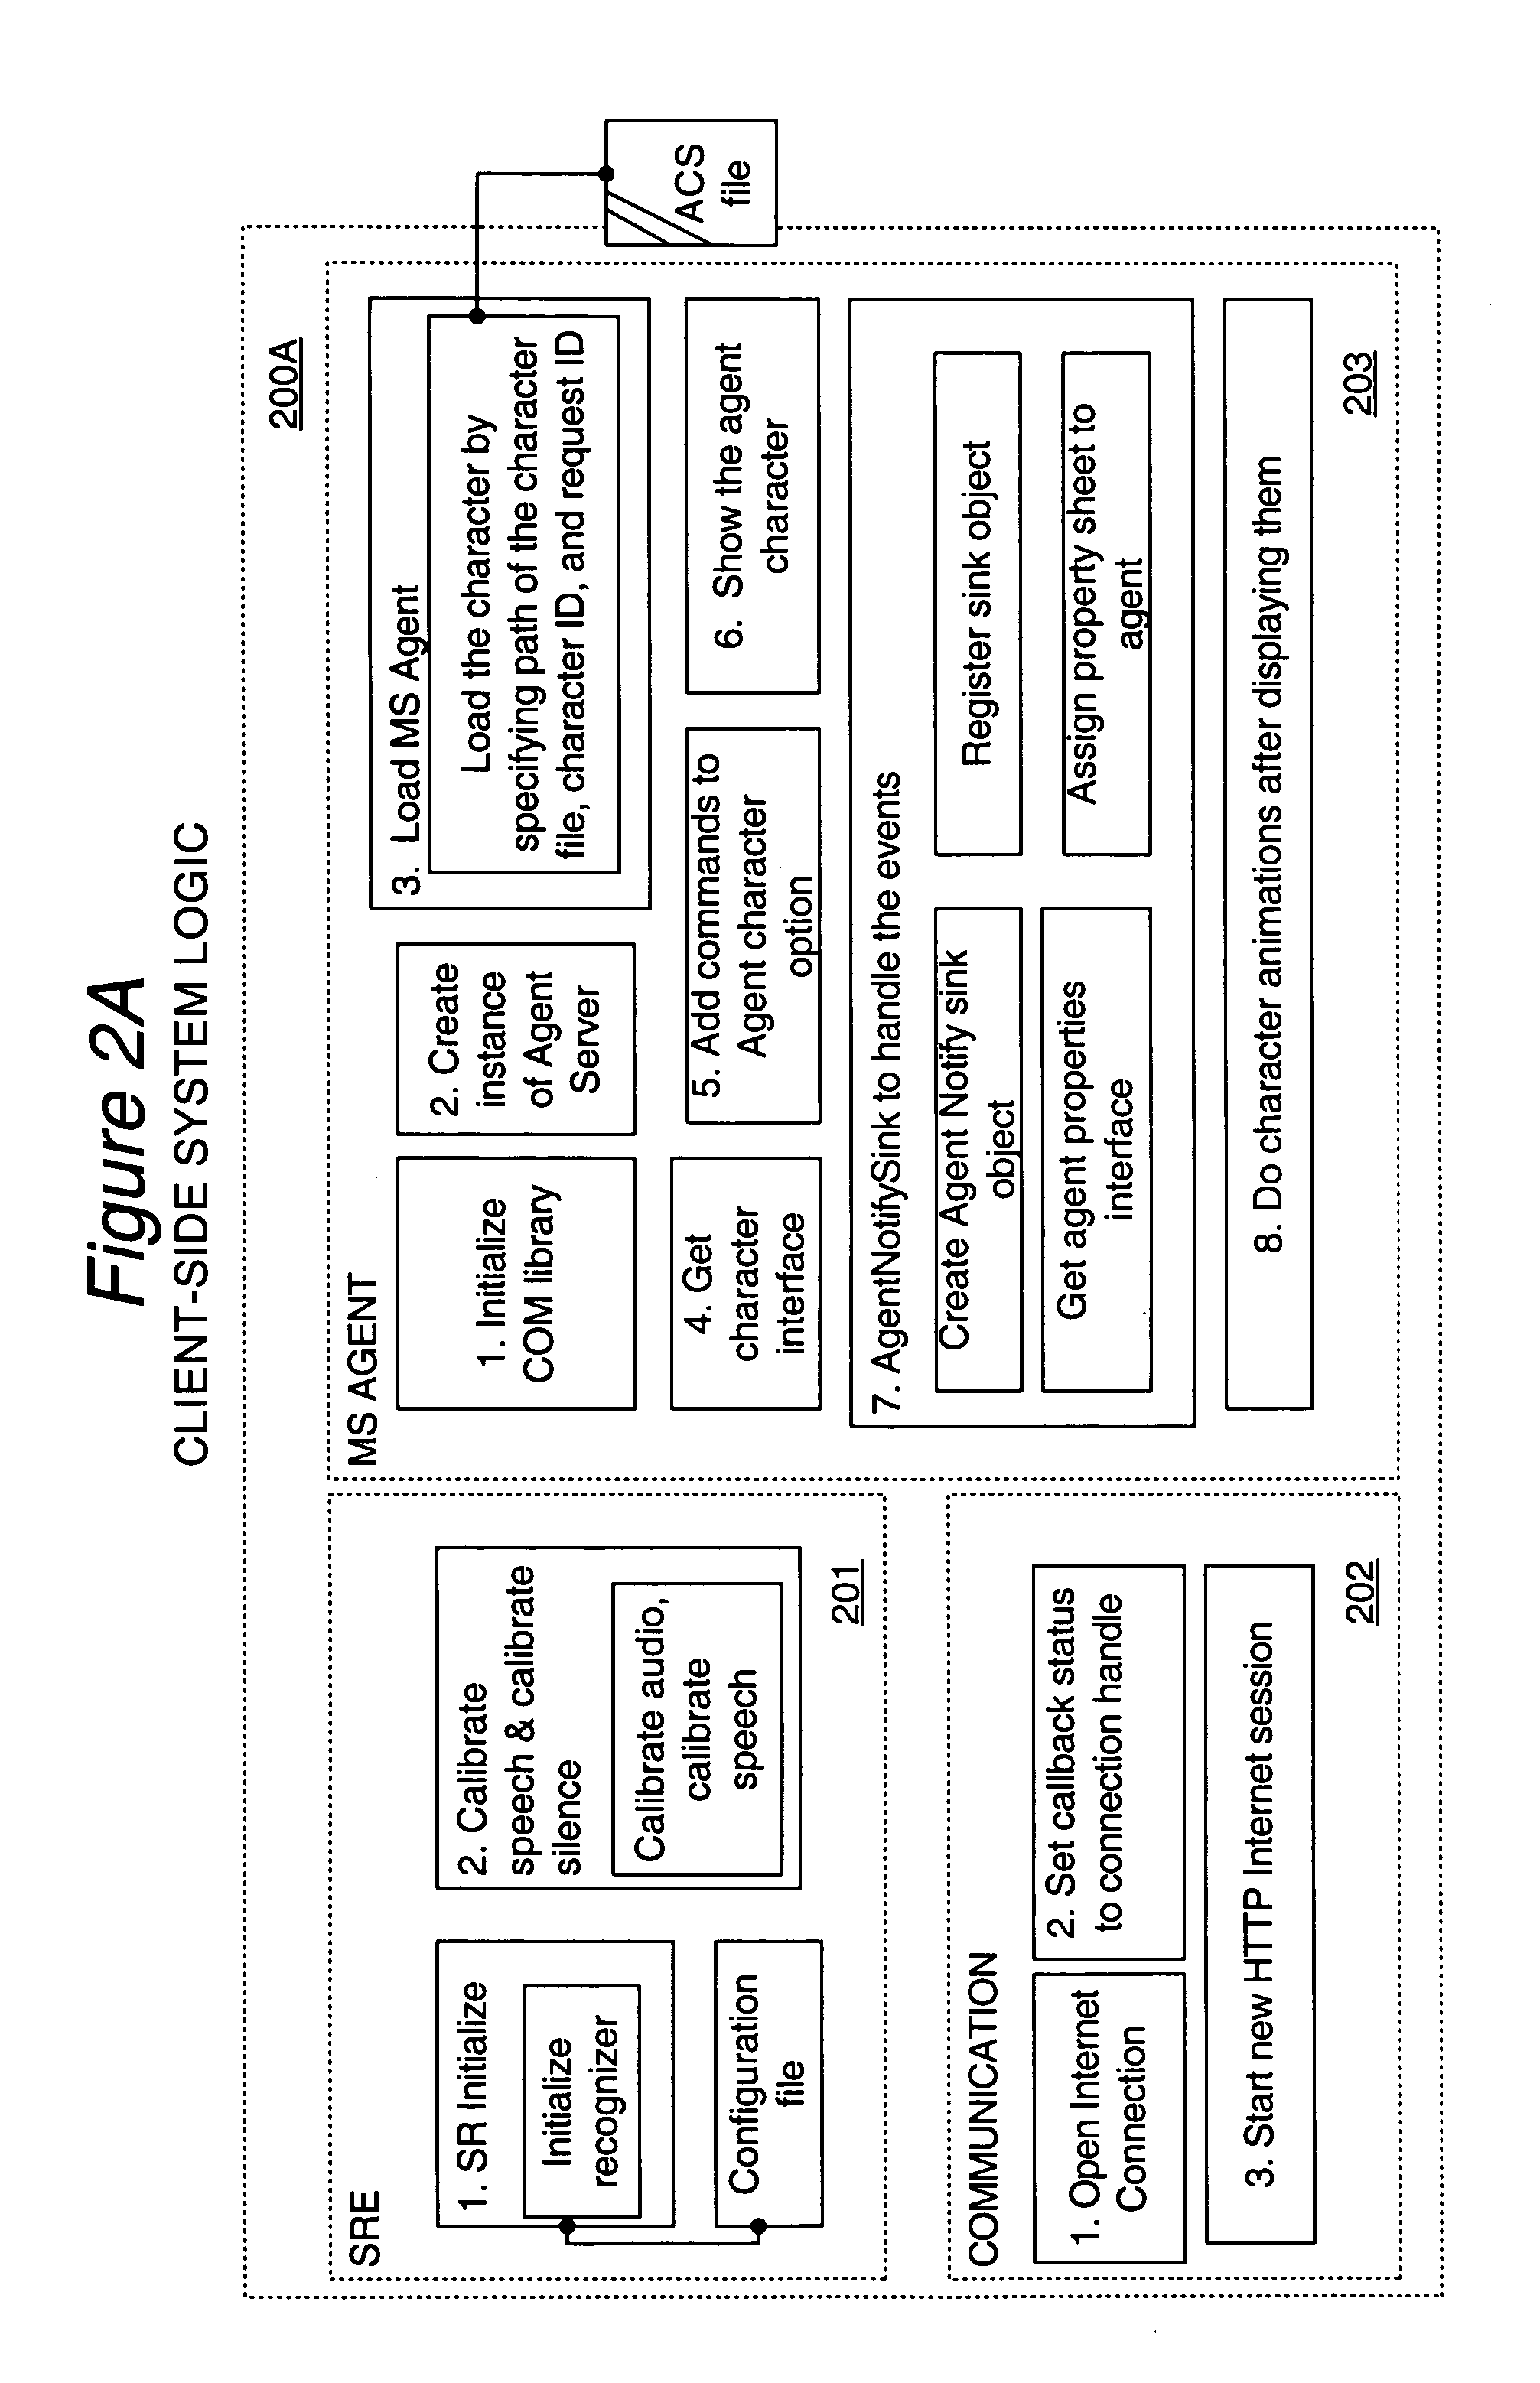 Partial speech processing device & method for use in distributed systems